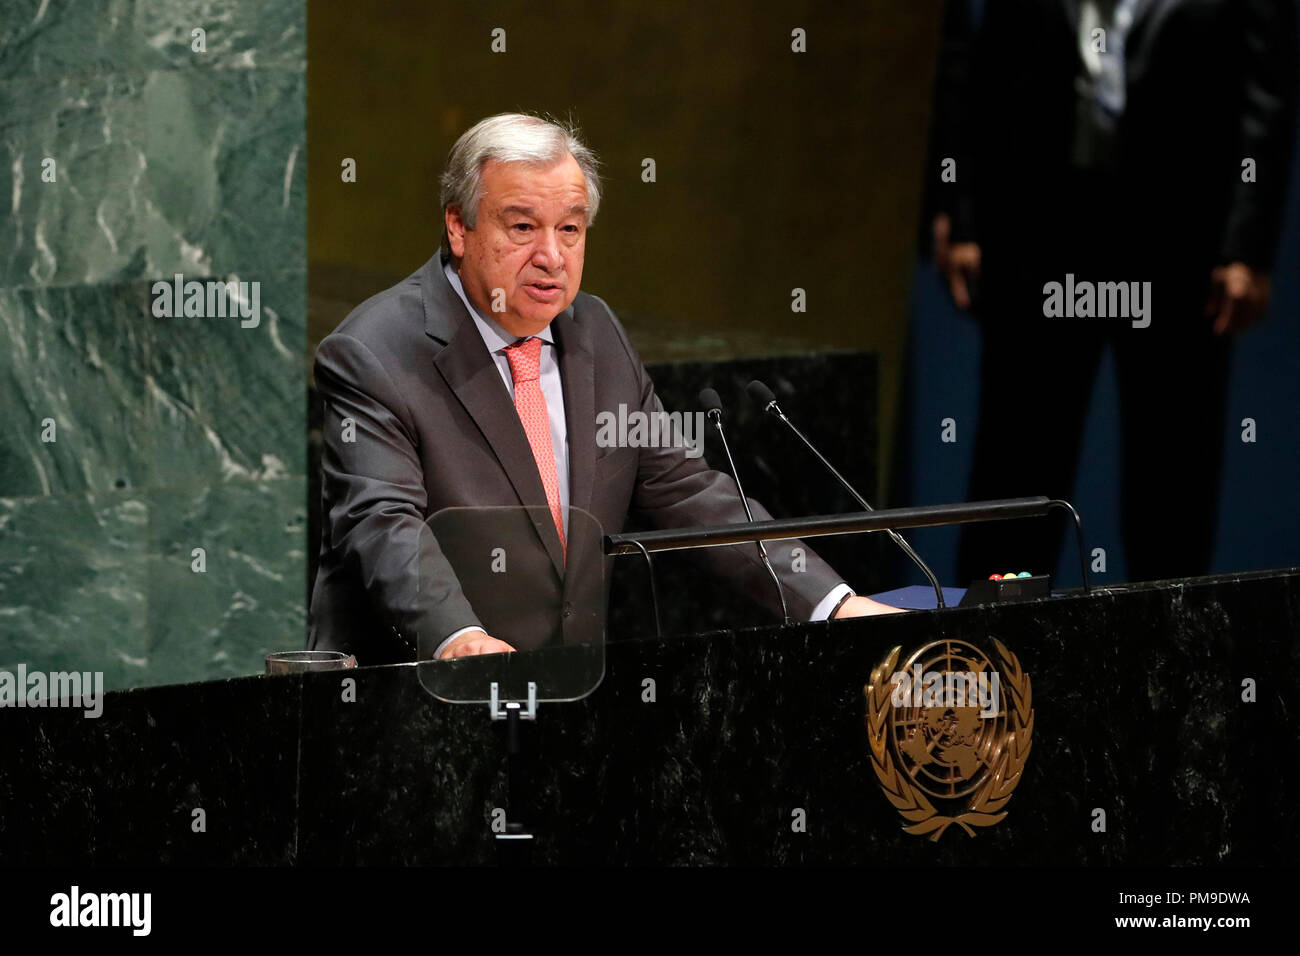 United Nations, UN headquarters in New York. 17th Sep, 2018. United Nations Secretary-General Antonio Guterres addresses the last meeting of the 72nd session of the United Nations General Assembly, at the UN headquarters in New York, Sept. 17, 2018. Outgoing UN General Assembly President Miroslav Lajcak on Monday outlined six major trends he identified during his one-year tenure on his last day in office, highlighting sustaining peace, combat against climate change and UN reform, among other things. Credit: Li Muzi/Xinhua/Alamy Live News Stock Photo